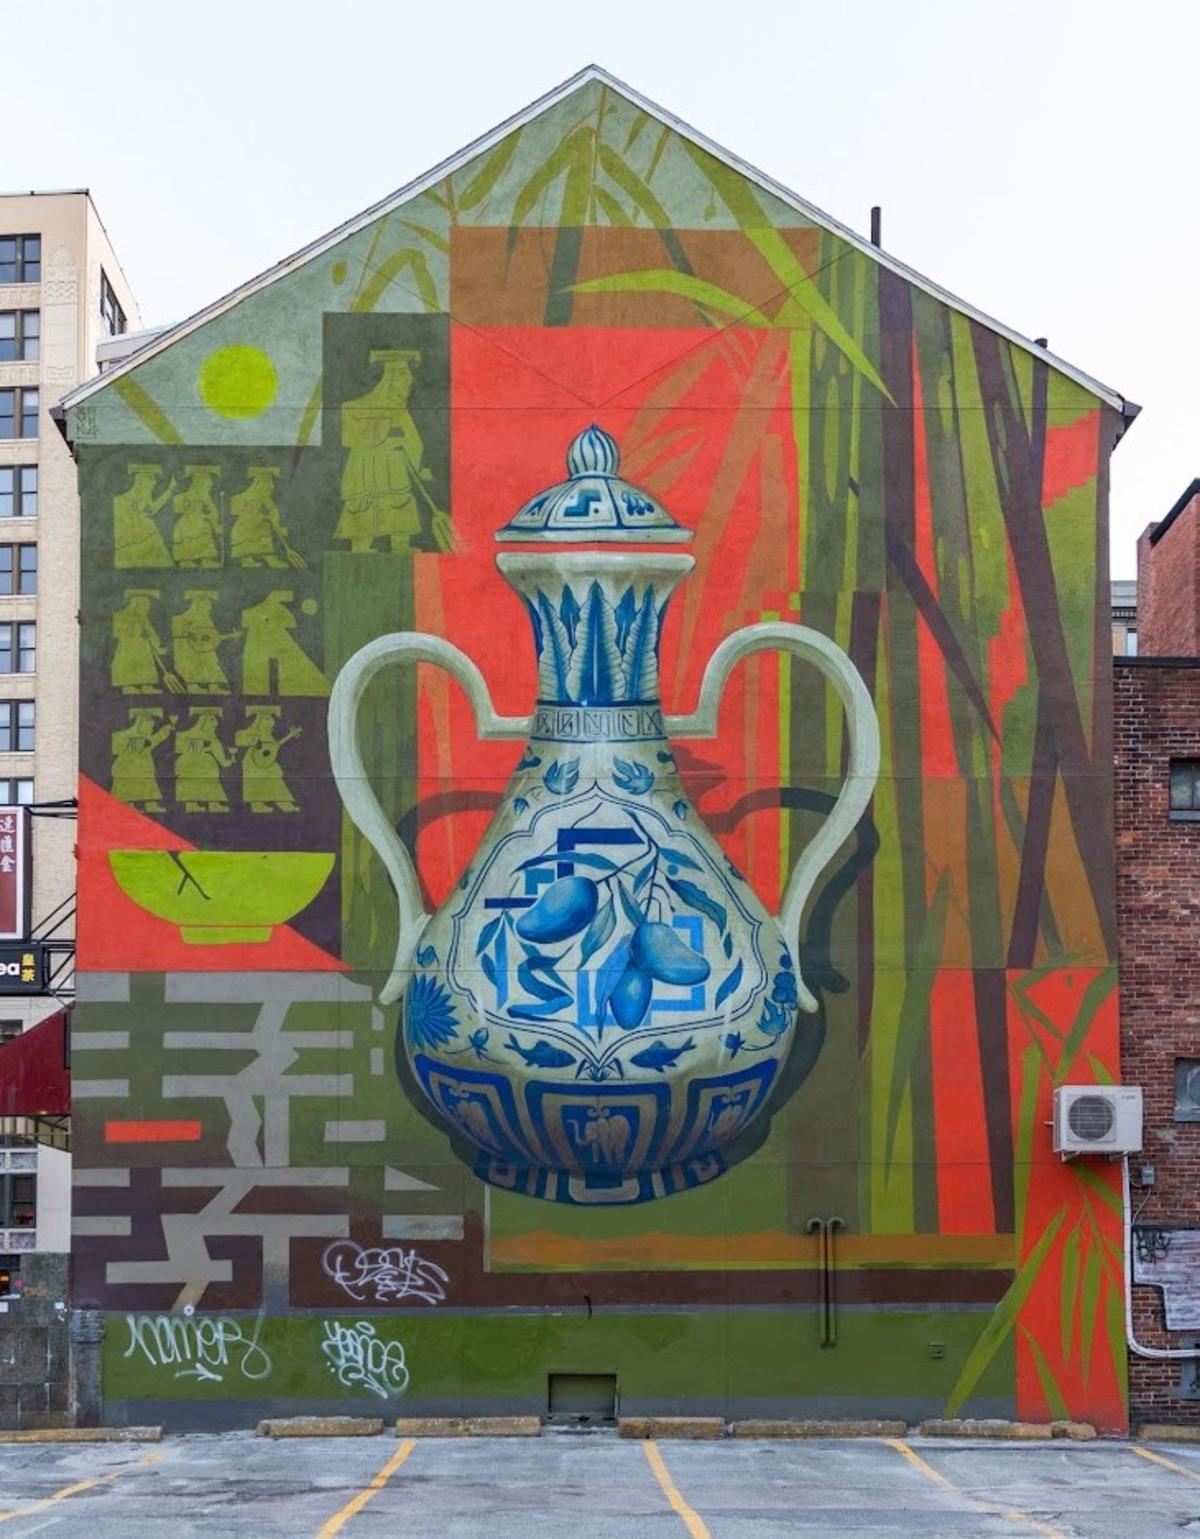 Mural of blue and white porcelain pot in Chinatown